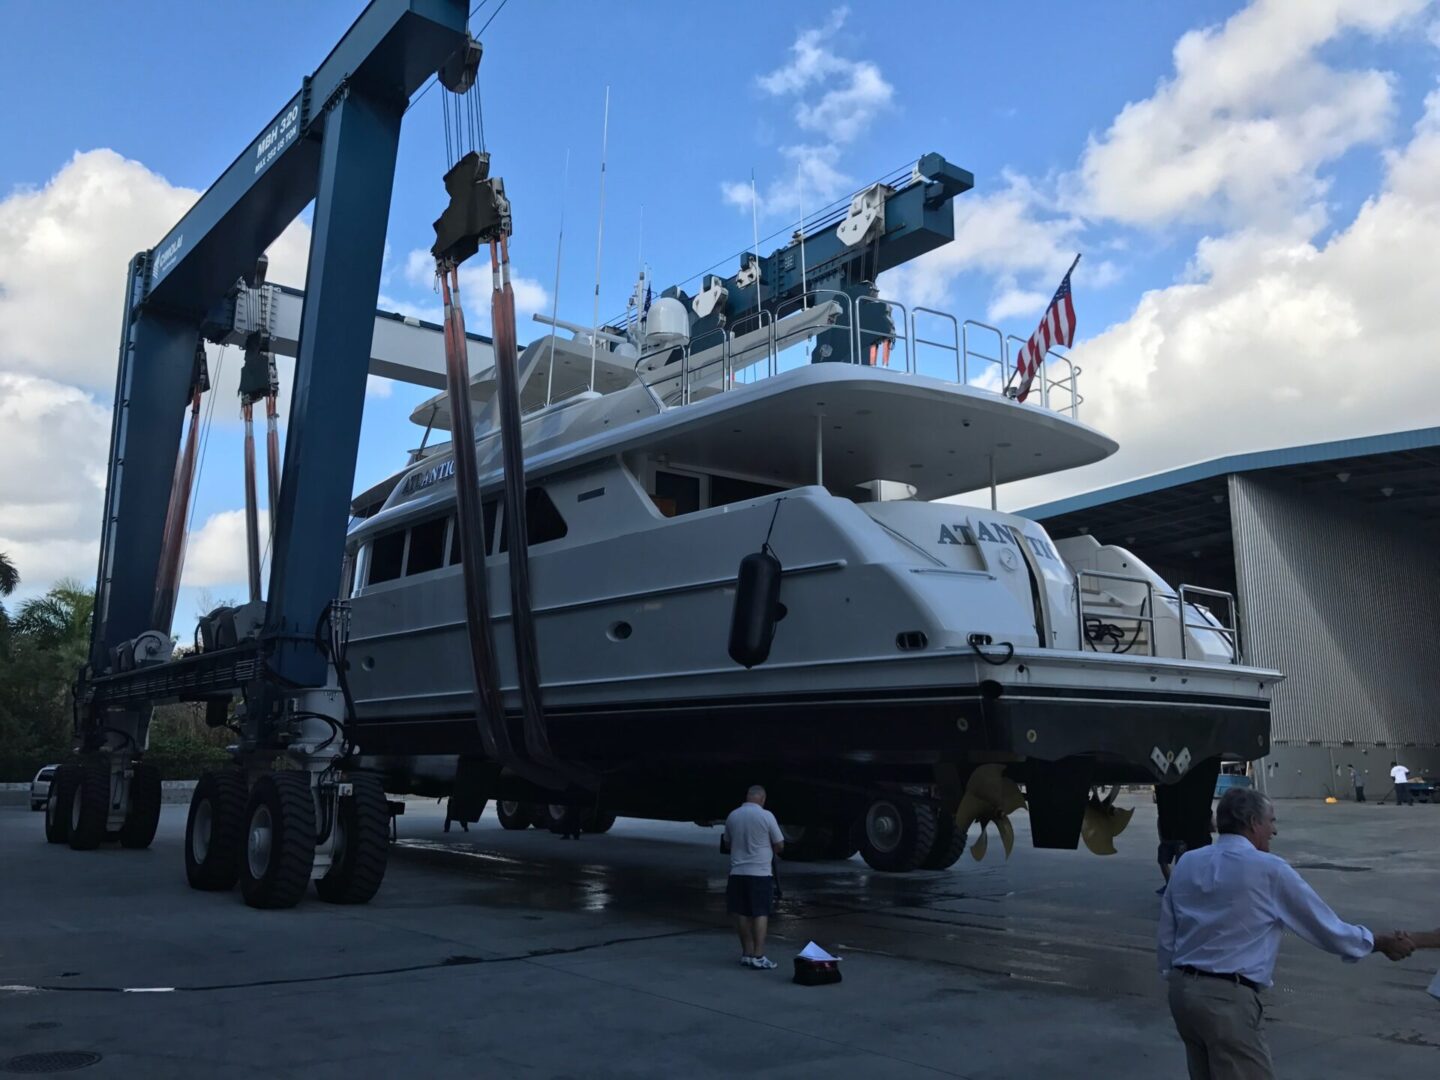 An Atlantic yacht being transported